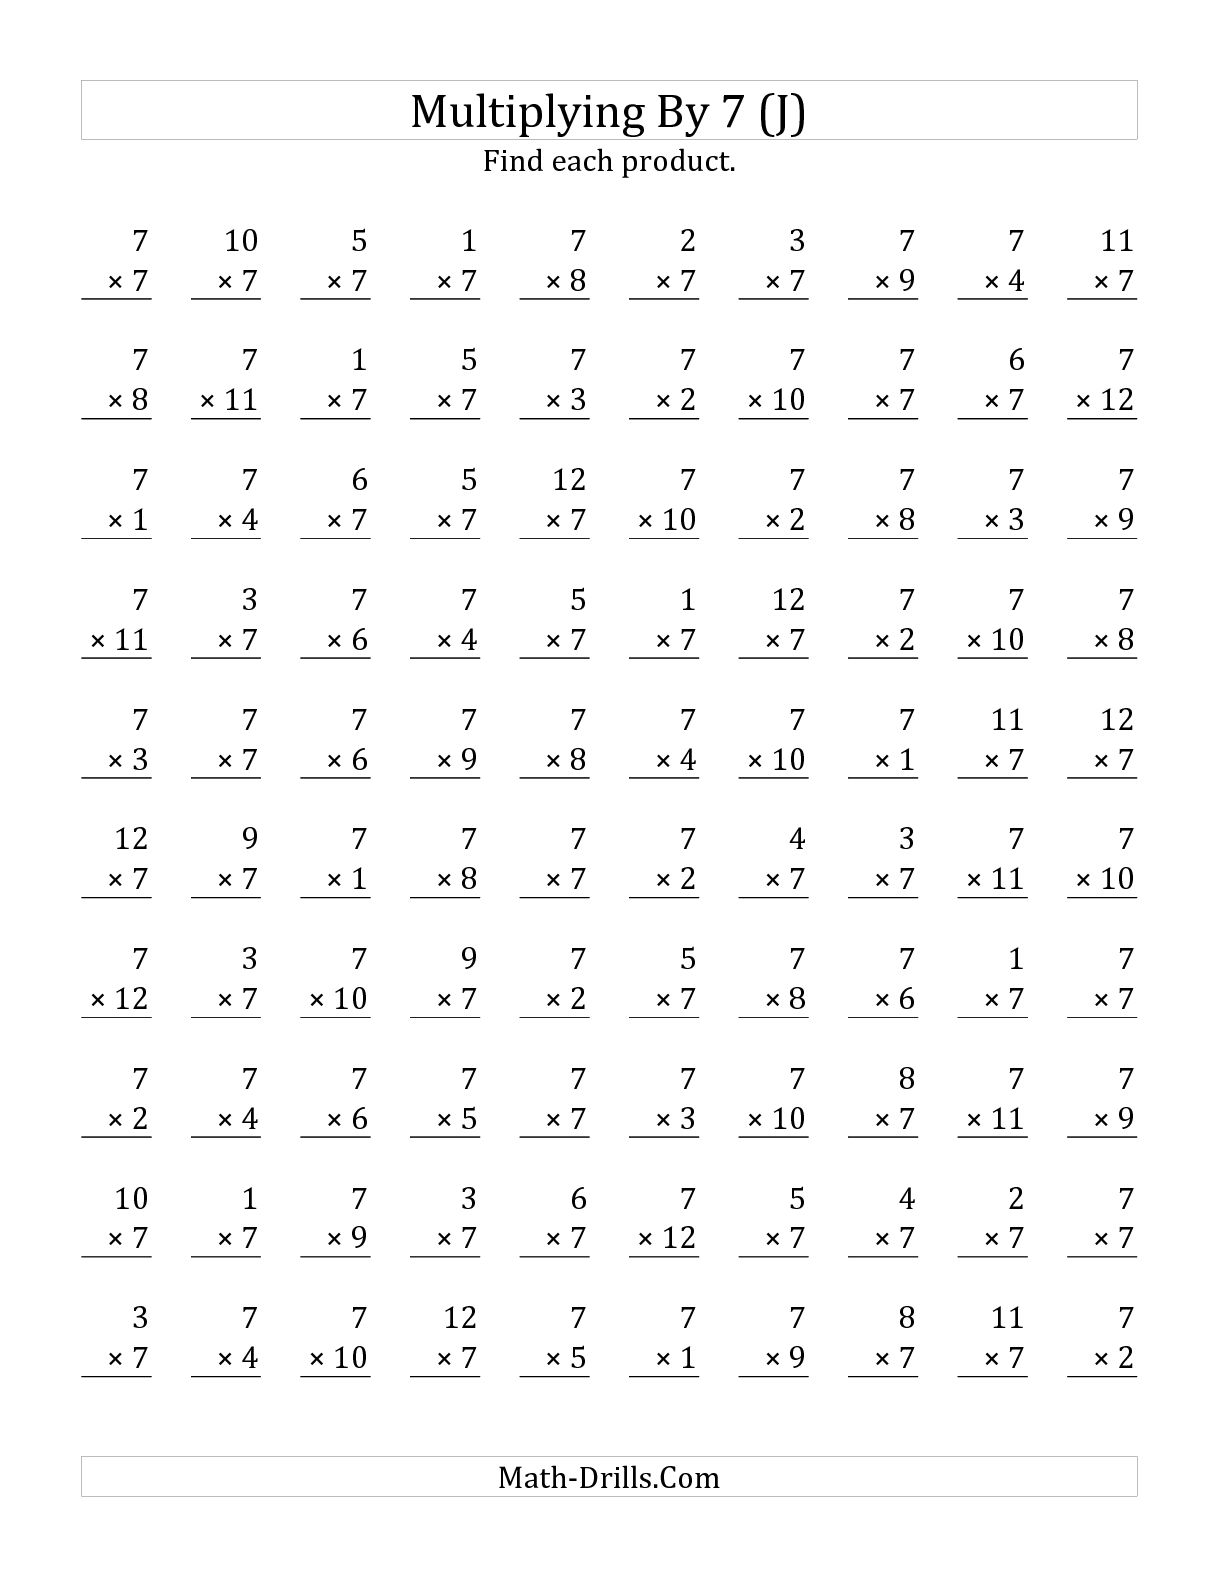 Multiplication Worksheets by 7 Image